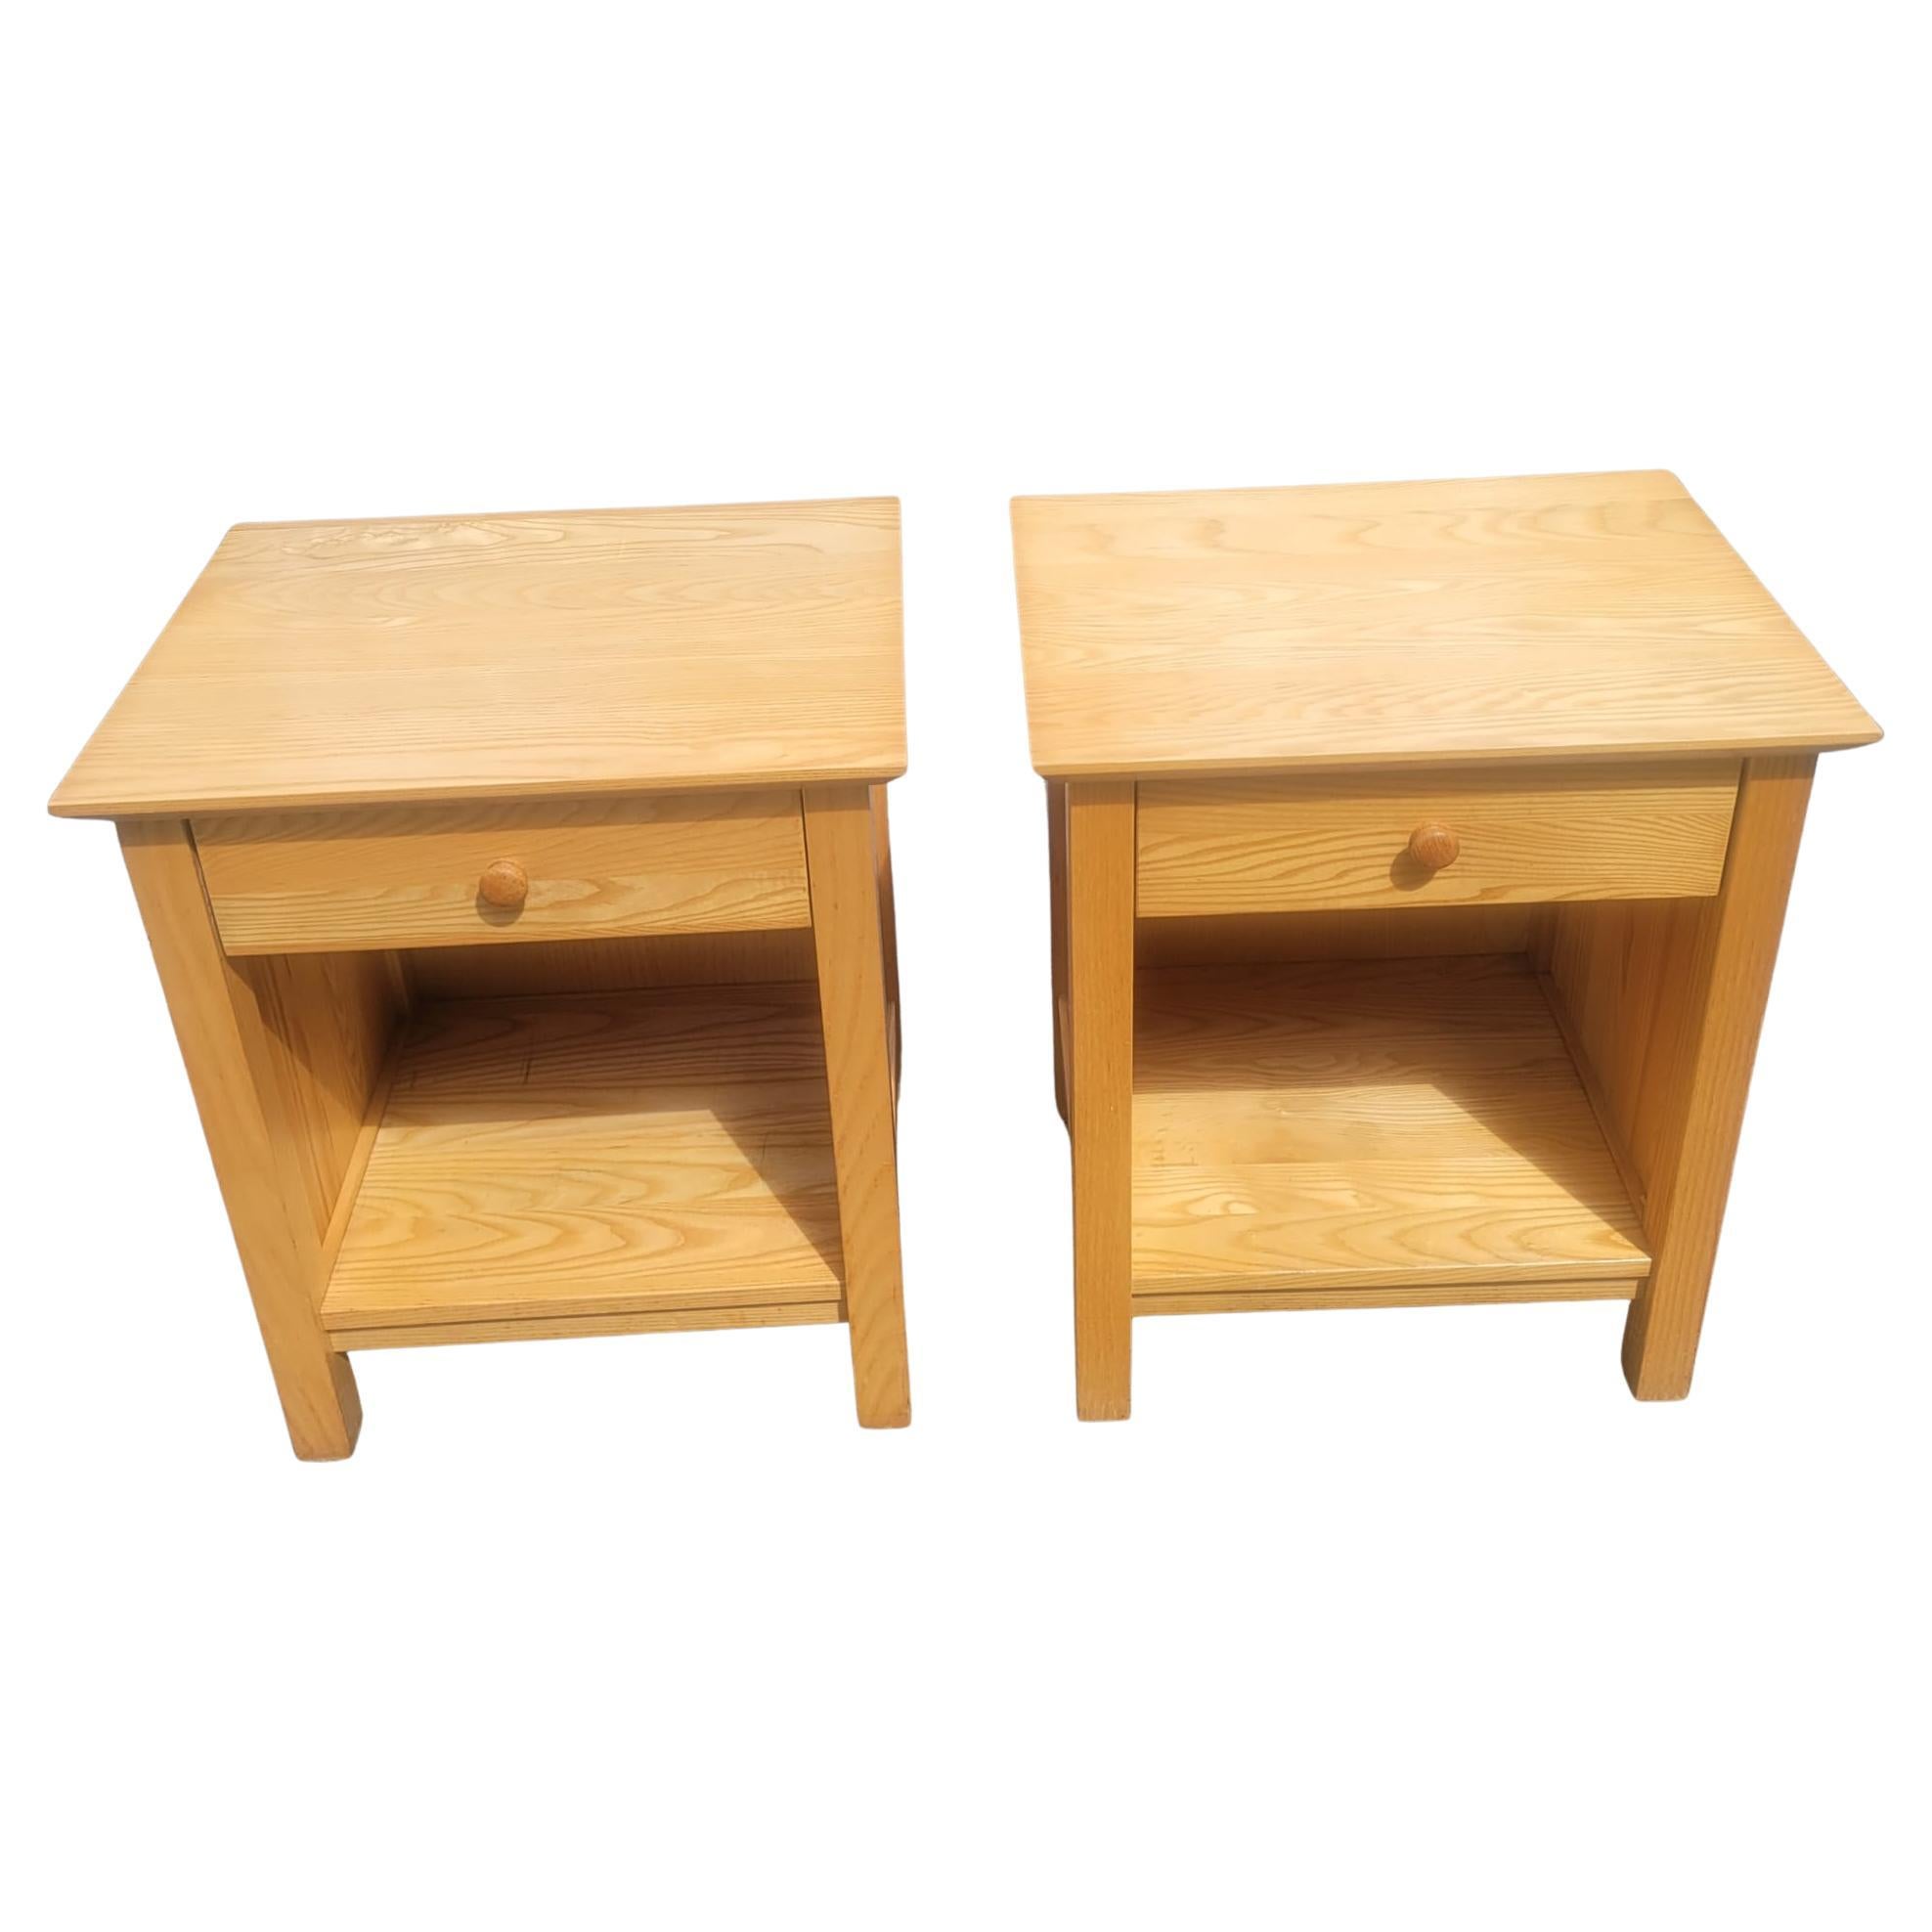 An elegant pair of Vermont Tubbs Solid Ash wood Single Drawer Bedside Tables or Nightstands in great condition.
The Vermont Tubbs brand is known for high quality craftsmanship, solid wood construction, and traditional designs. From 1840s till 2008,